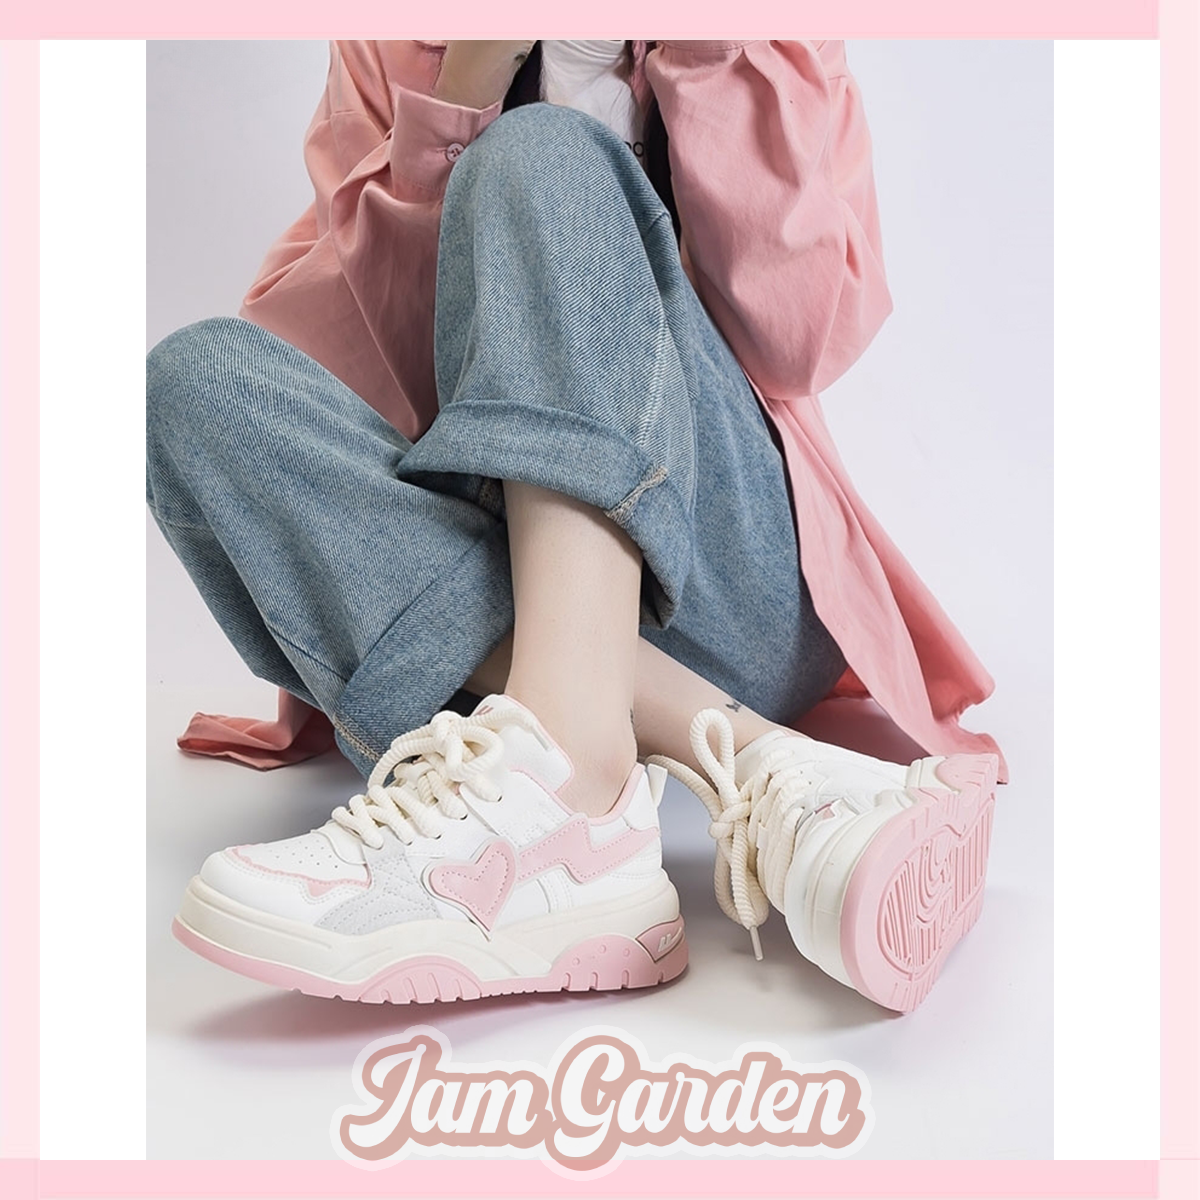 Dopamine Love Small White Shoes All-Match Shoes Niche Original Thick-Soled Casual Sneakers - Jam Garden